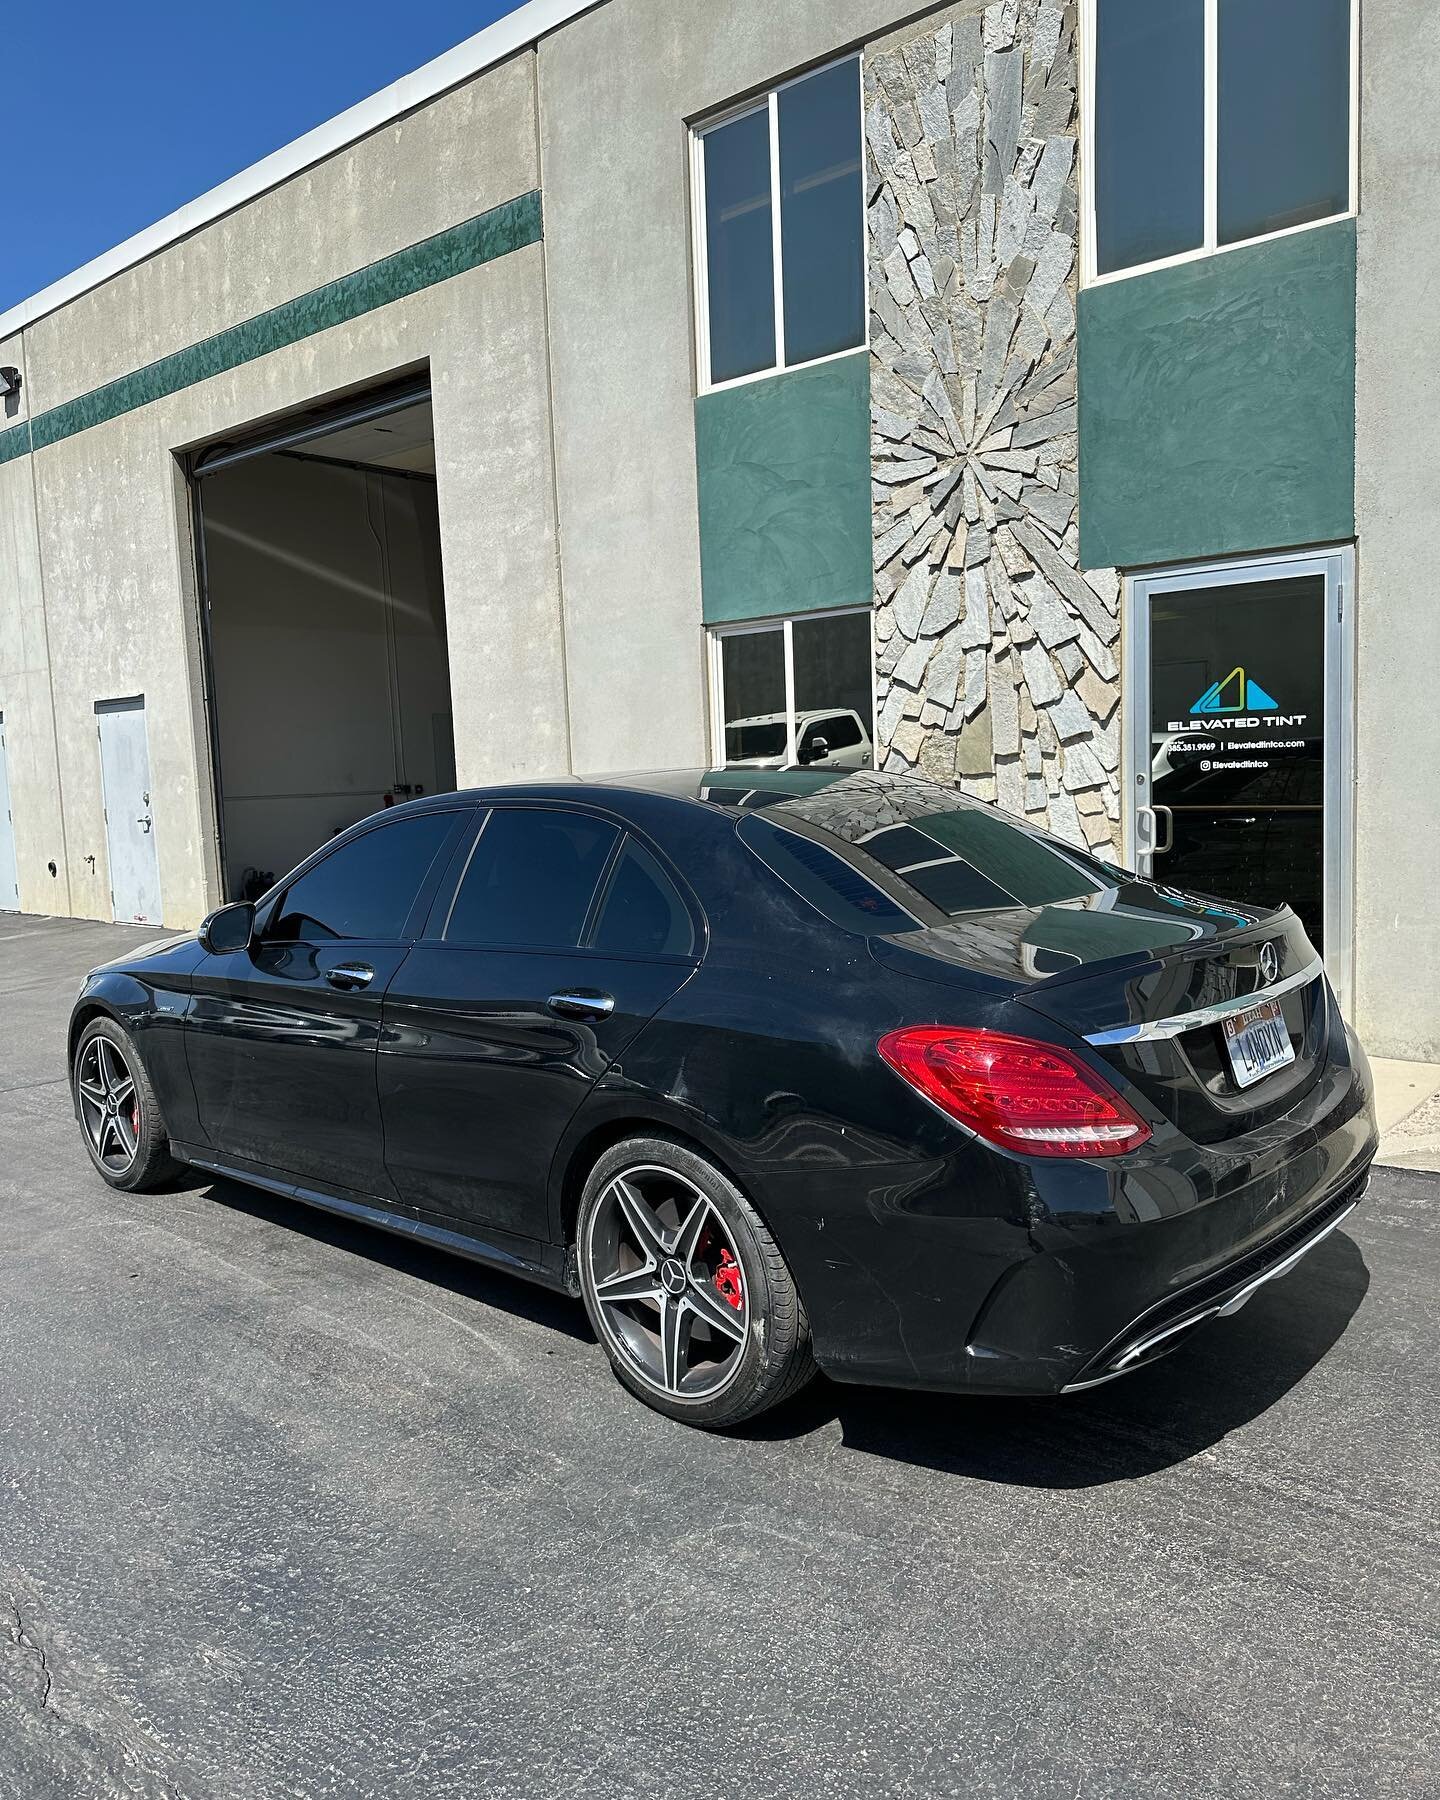 Few tints from this week! 
Summer is right around the corner, send us a message to get window tint and protect yourself from the harmful UV rays and heat!